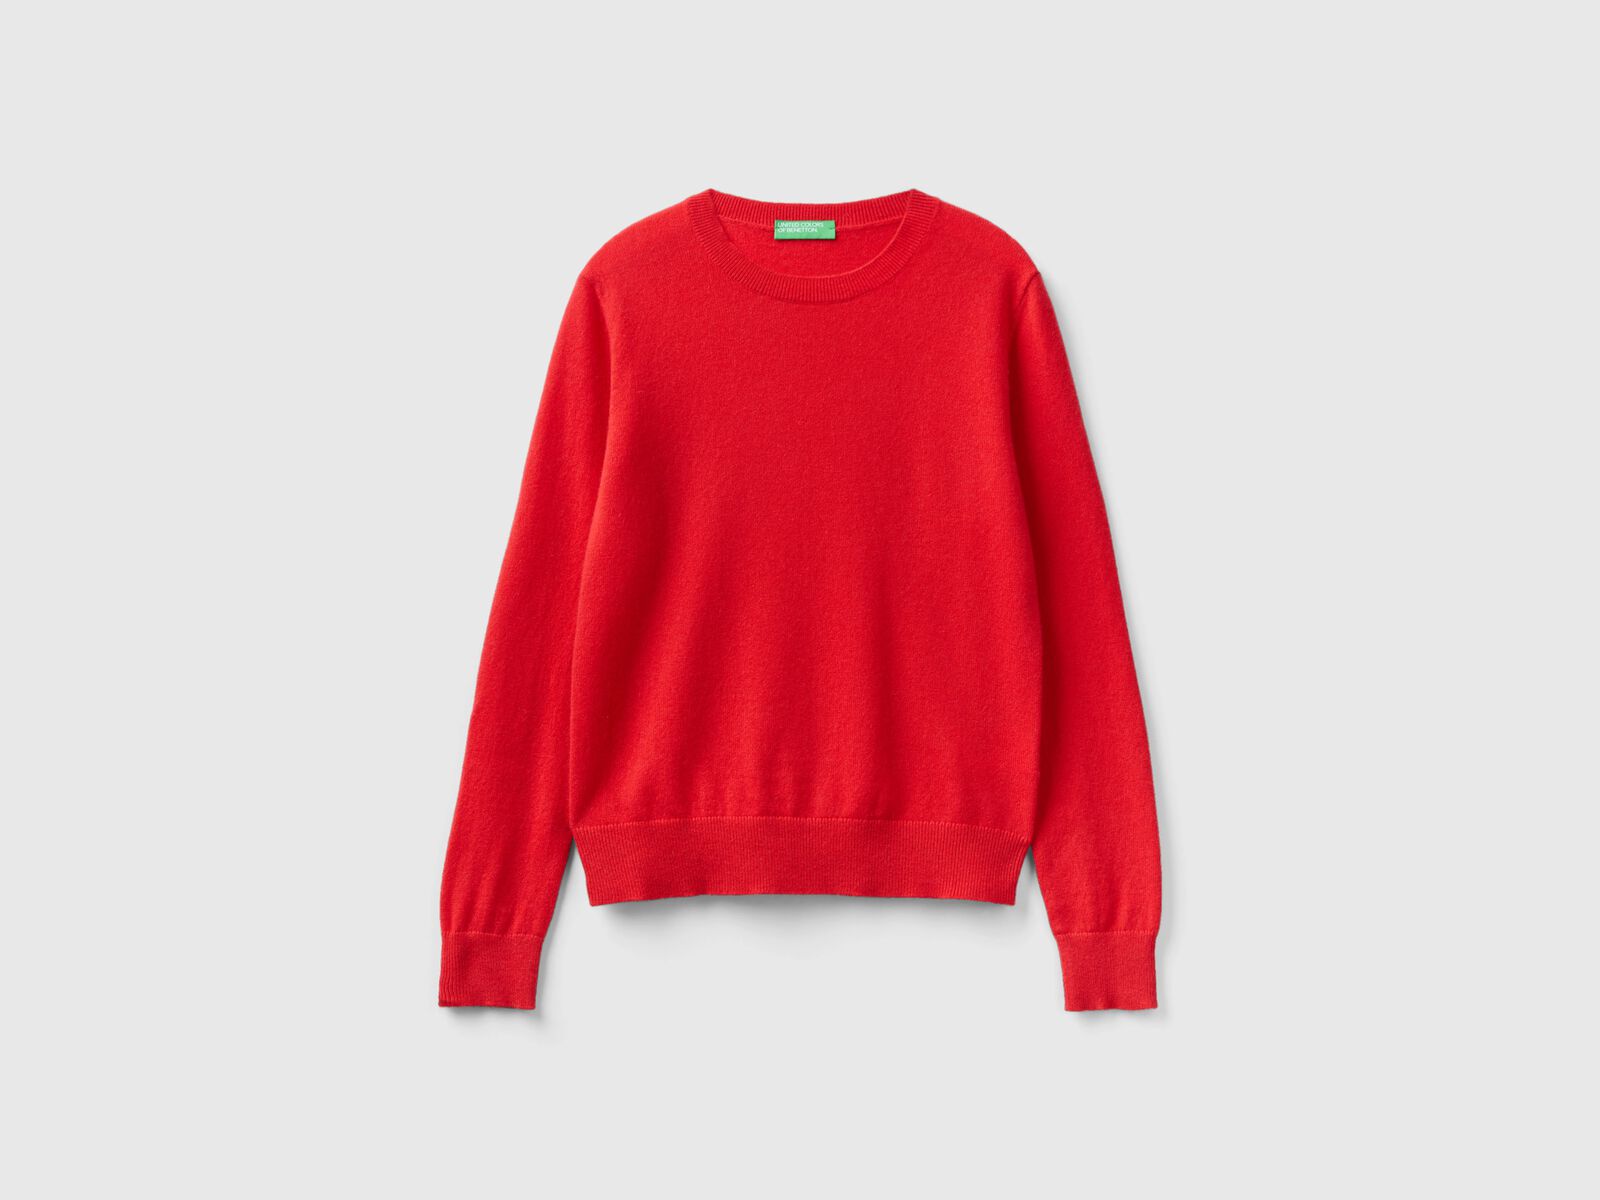 Subtle Luxury Washable Cashmere Sweater - Coral Red on Garmentory